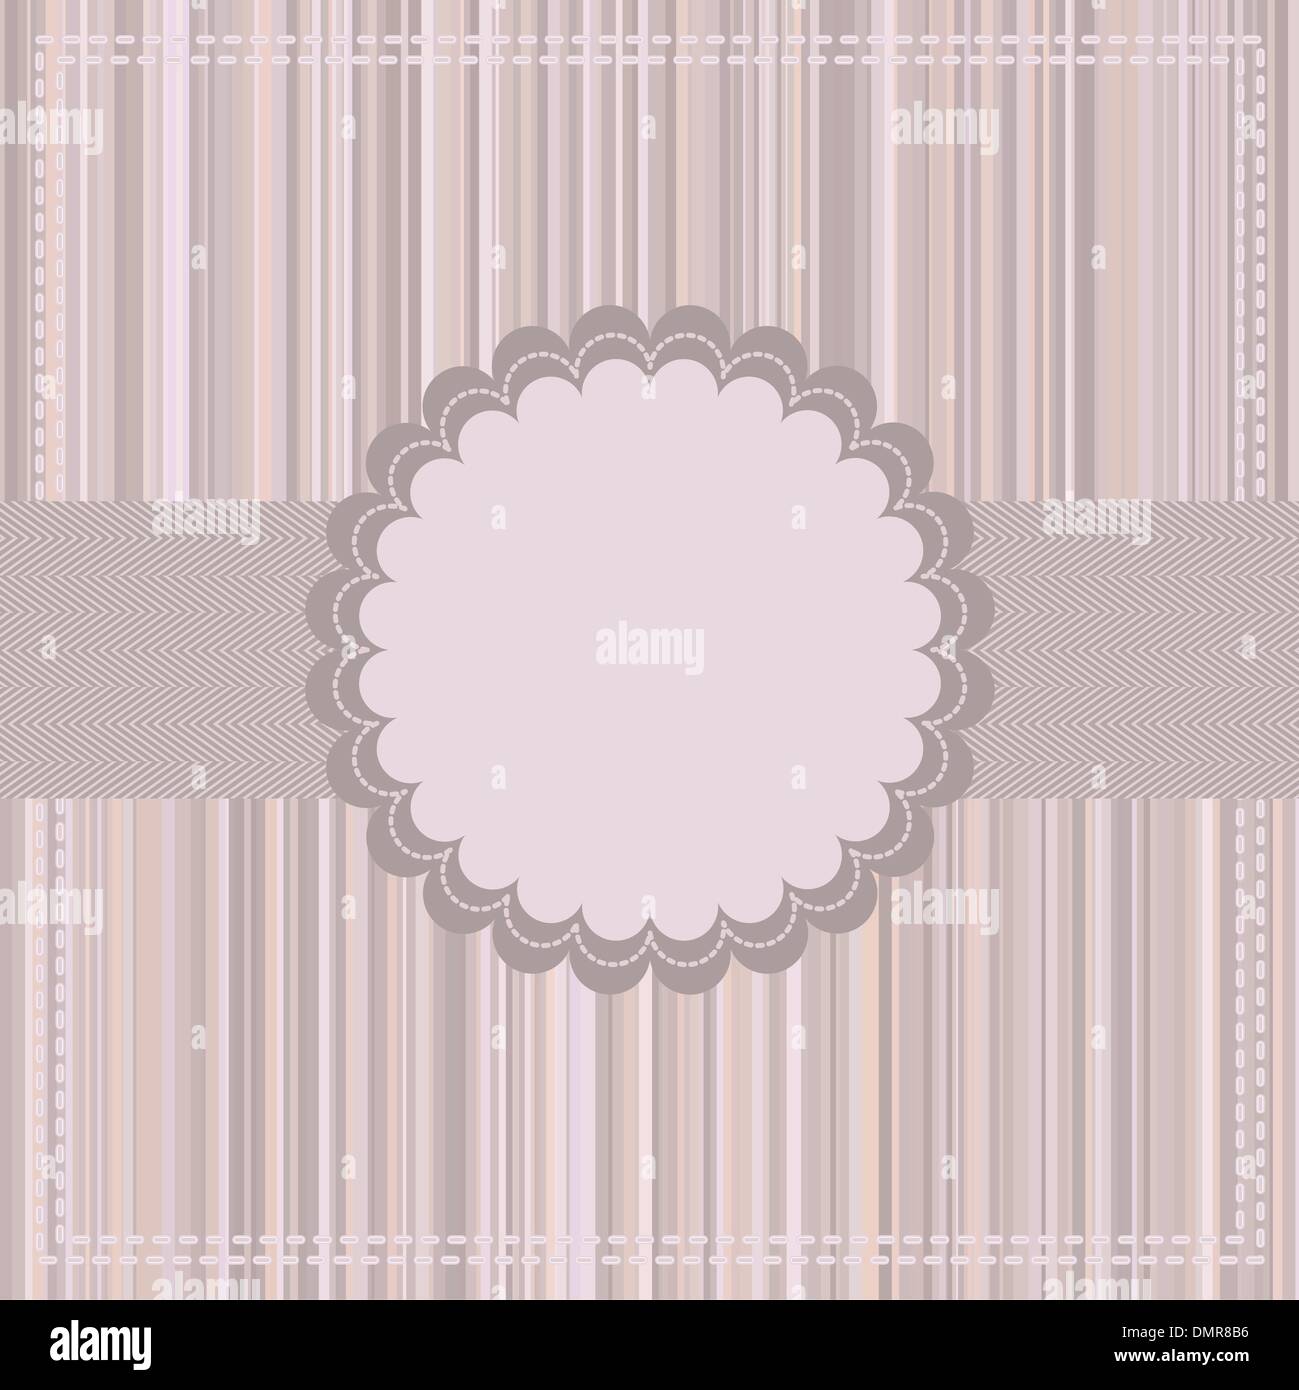 Greeting card template. EPS 8 Stock Vector